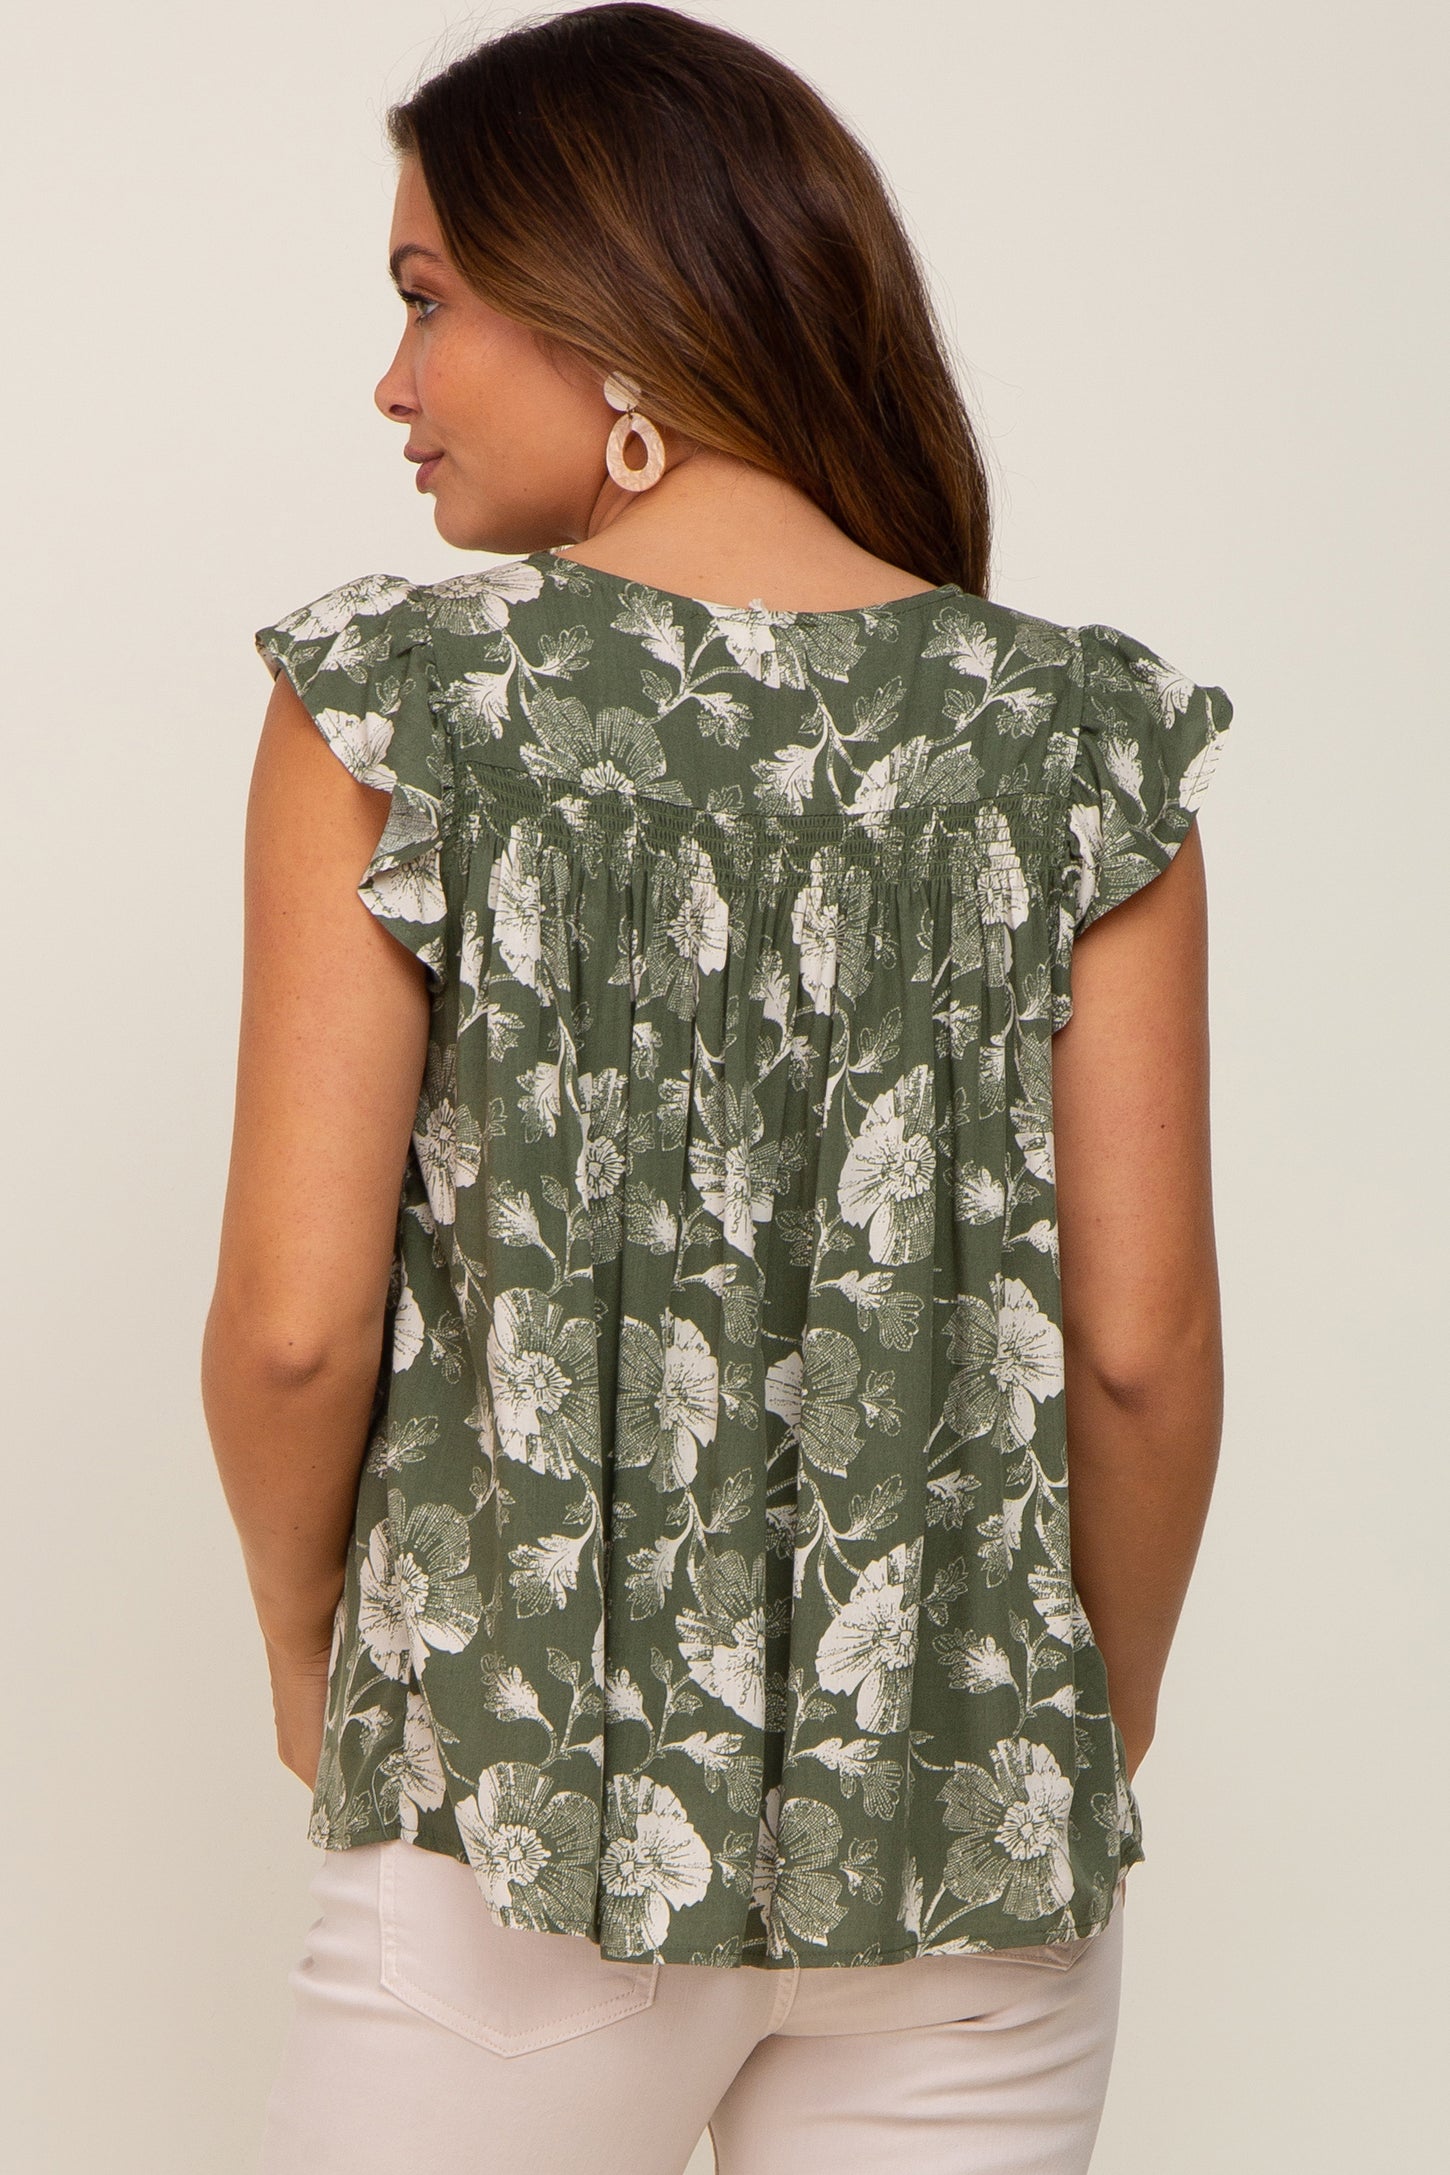 Green Floral Flutter Sleeve Front Tie Maternity Top